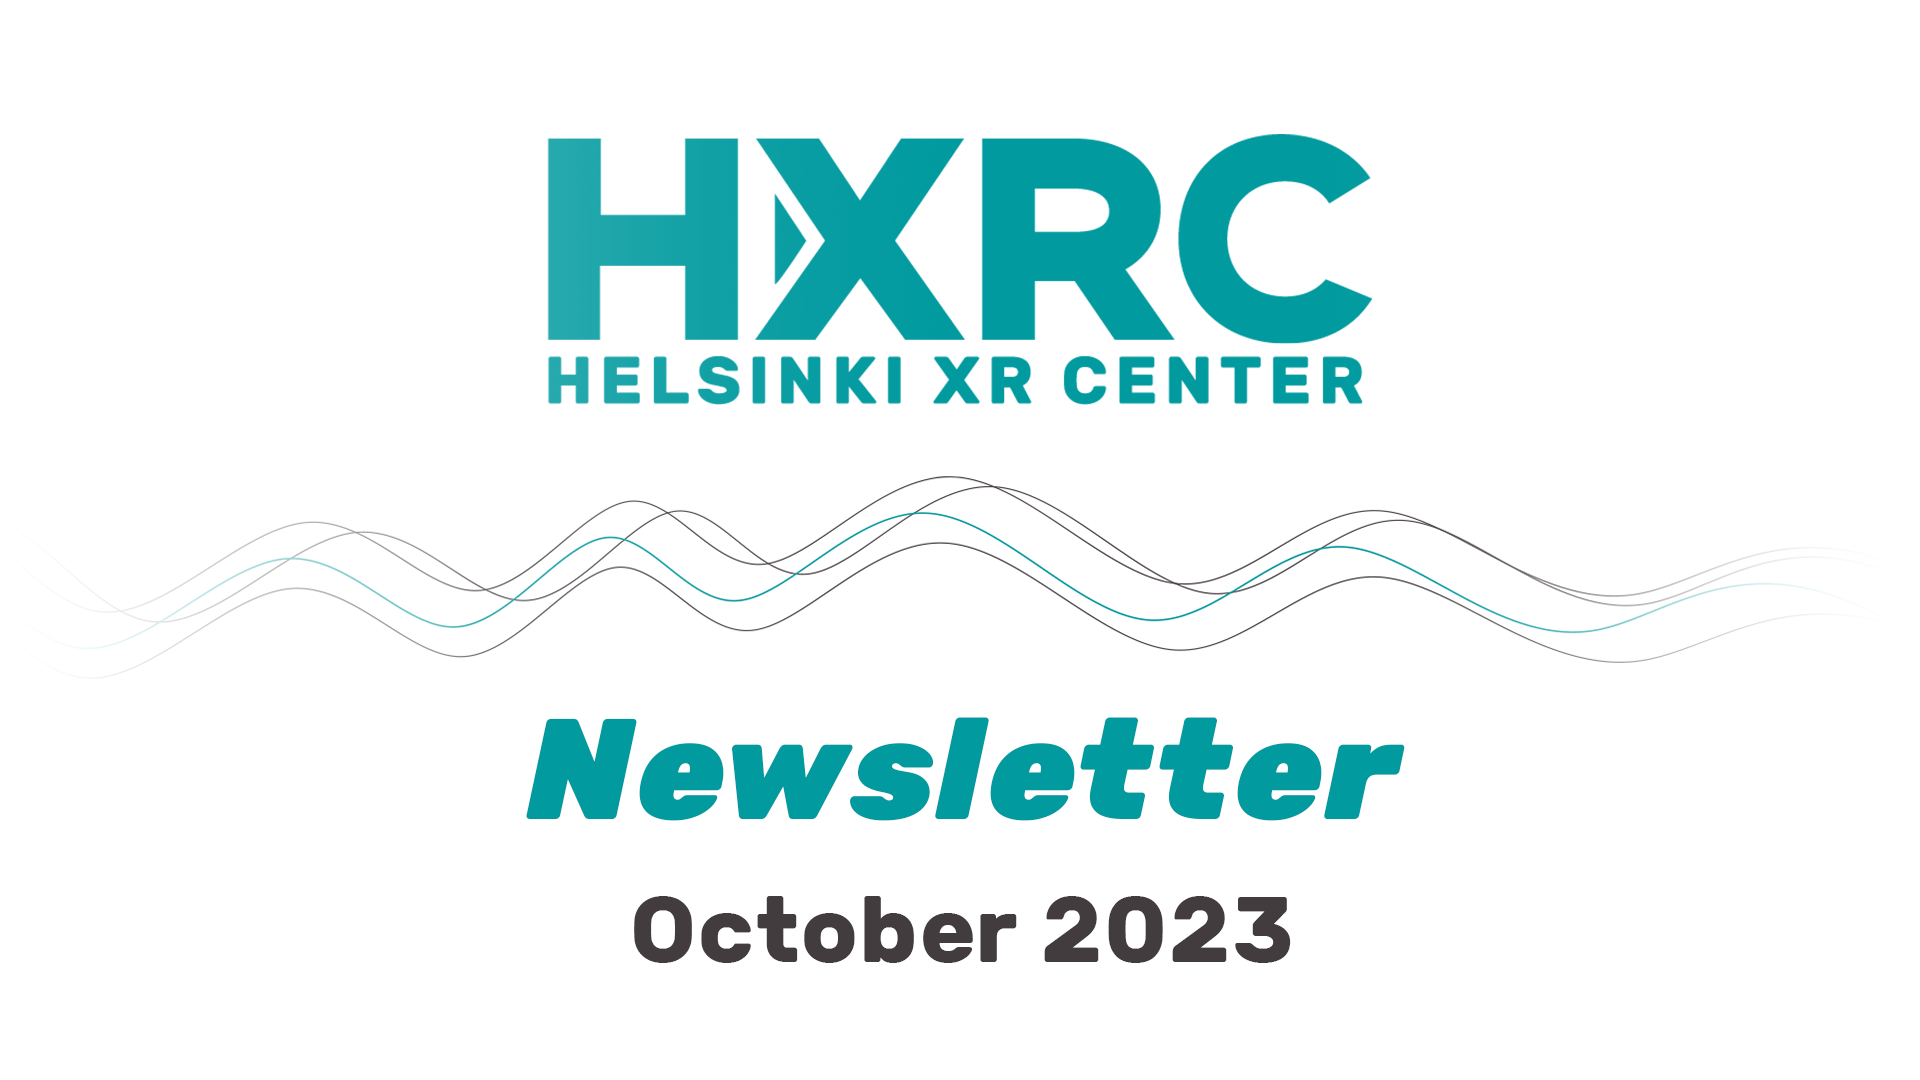 HXRC Newsletter May 2023